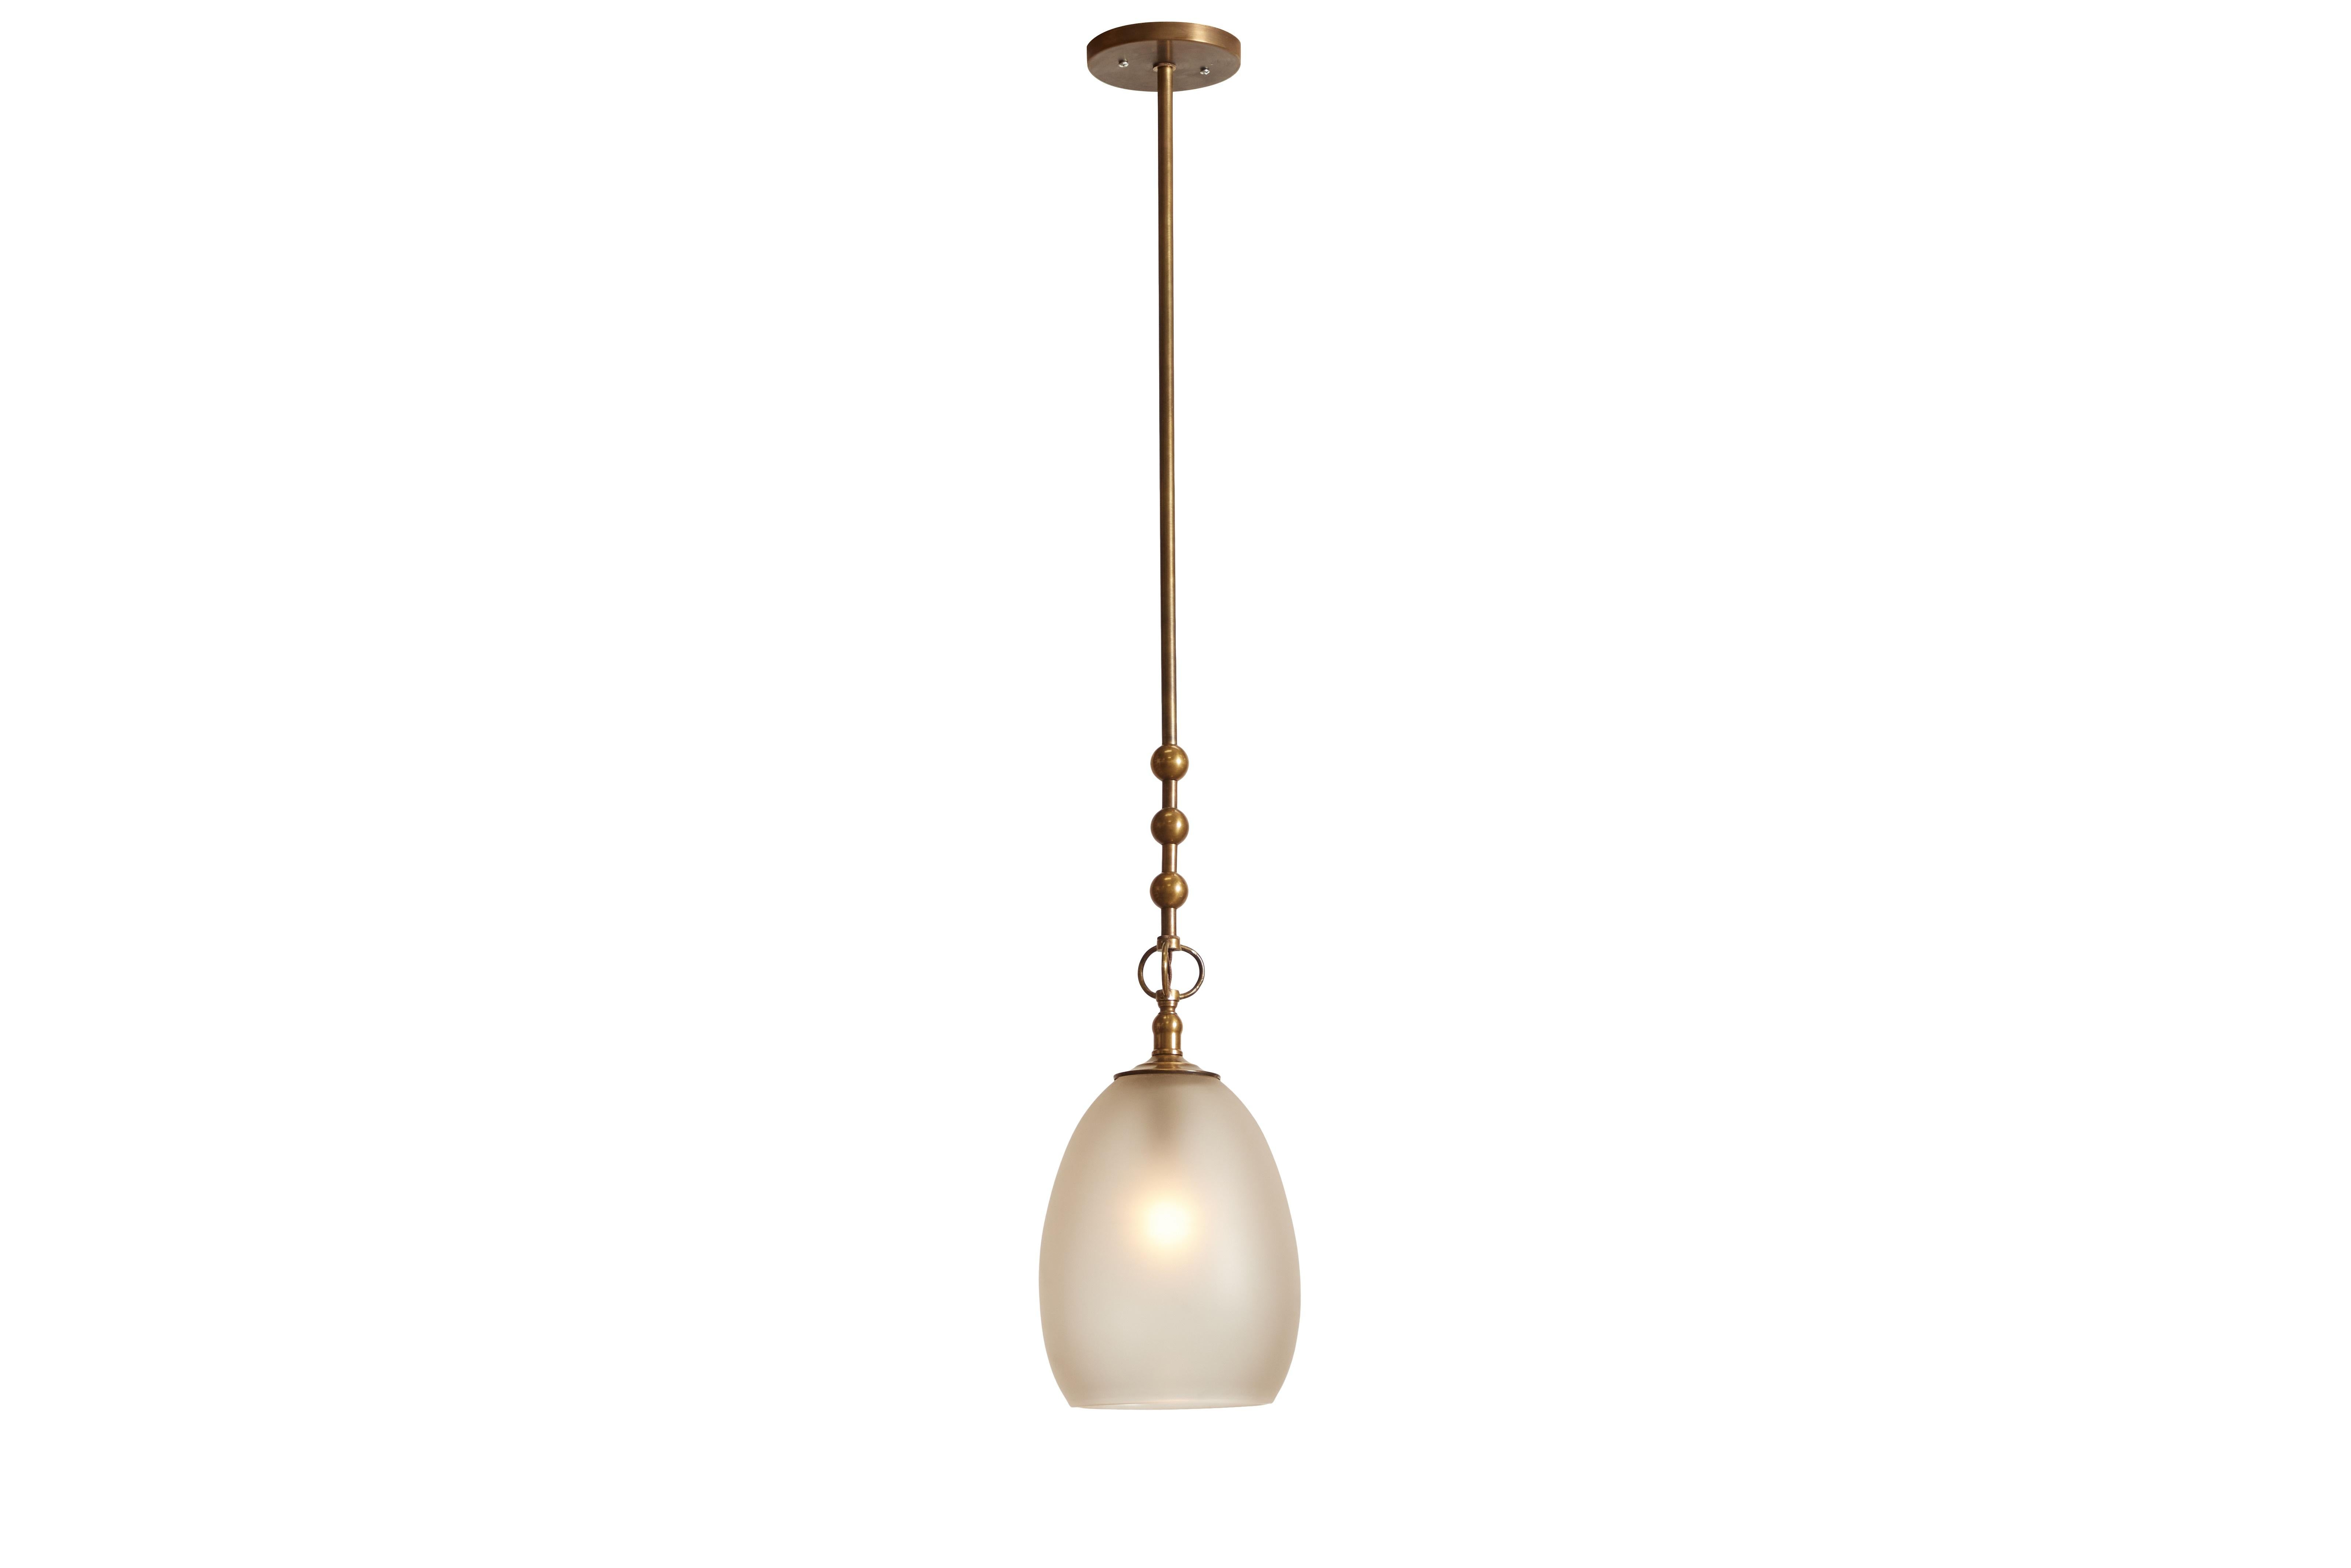 The Pearl pendant features hand blown frosted glass in a teardrop shade with an unlacquered brass metal finish. Our take on a pearl earring.
 
DIMENSIONS: 42.5